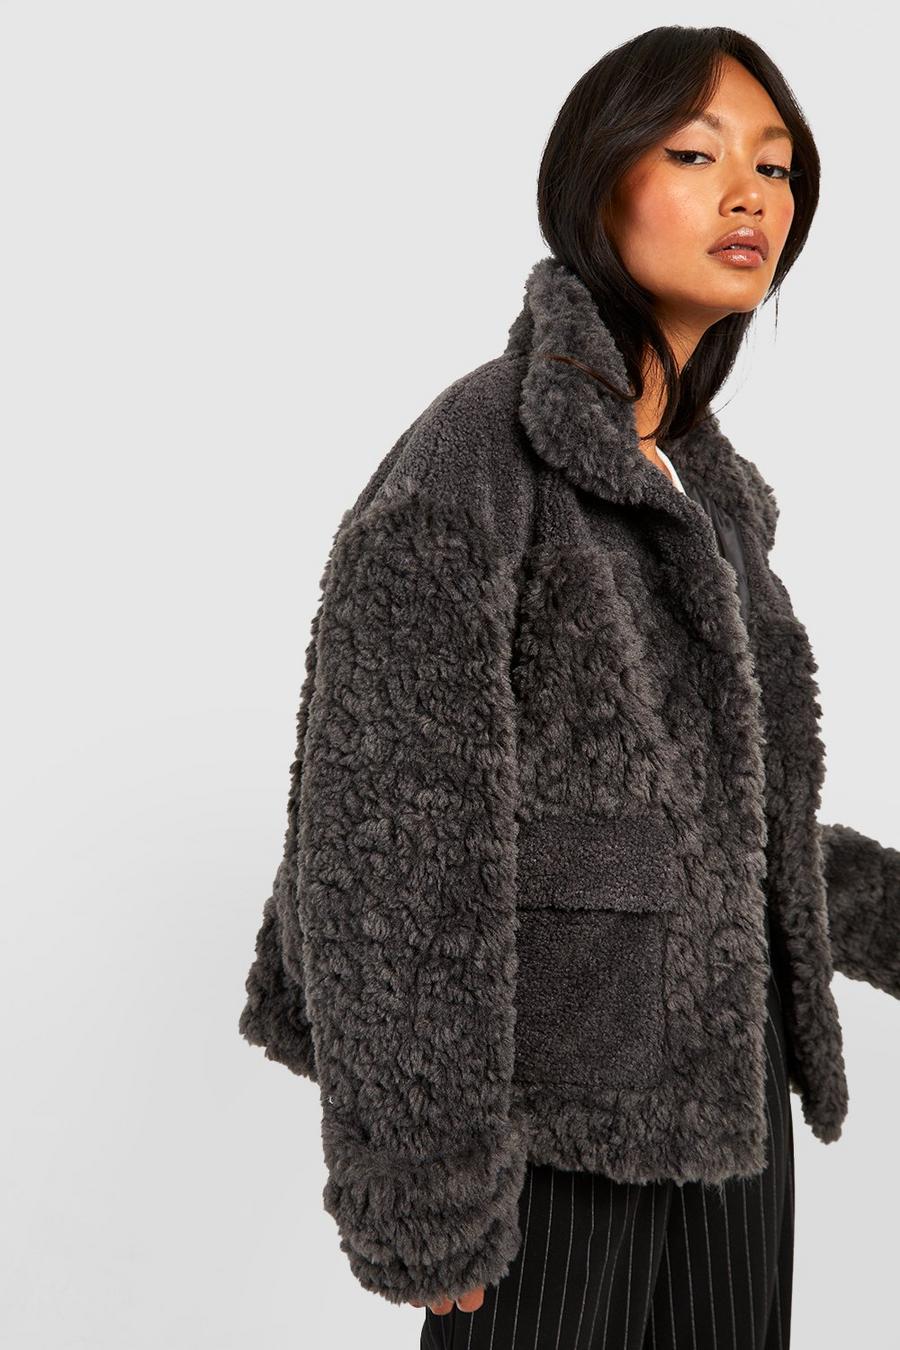 Women's Urban Outfitters Faux Fur Coats, New & Used